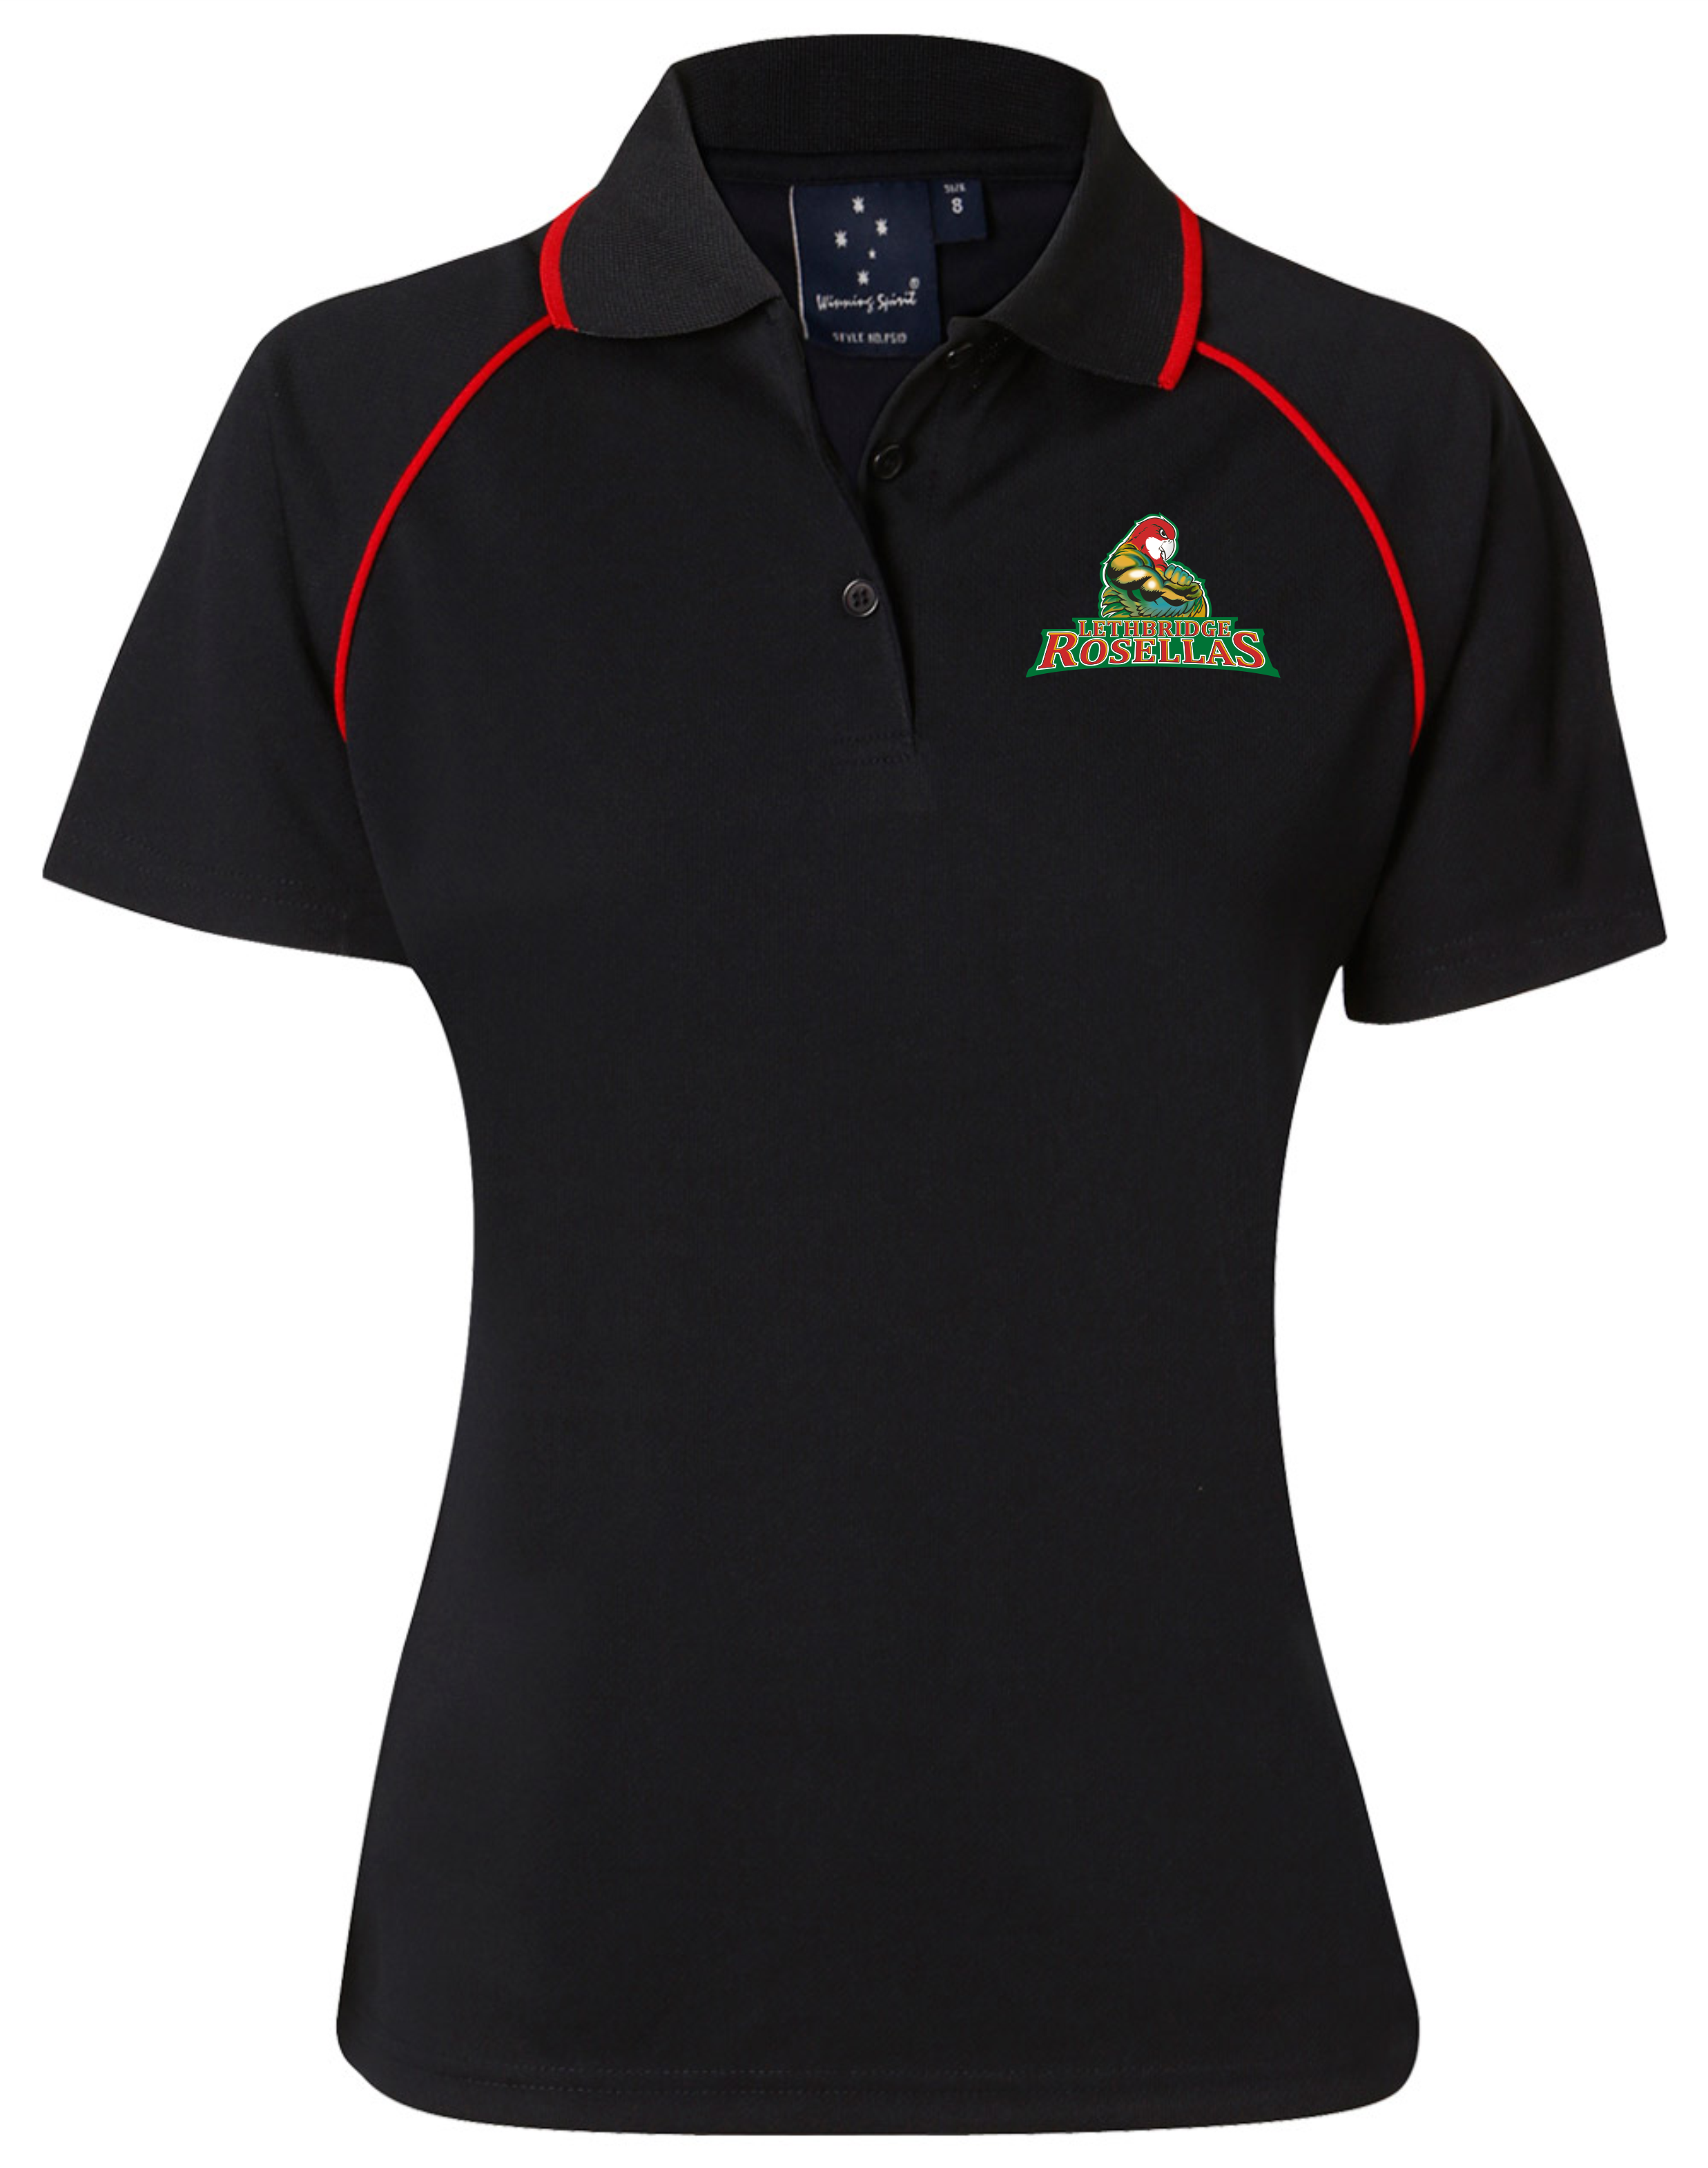 Ladies Club Polo in Black/Red